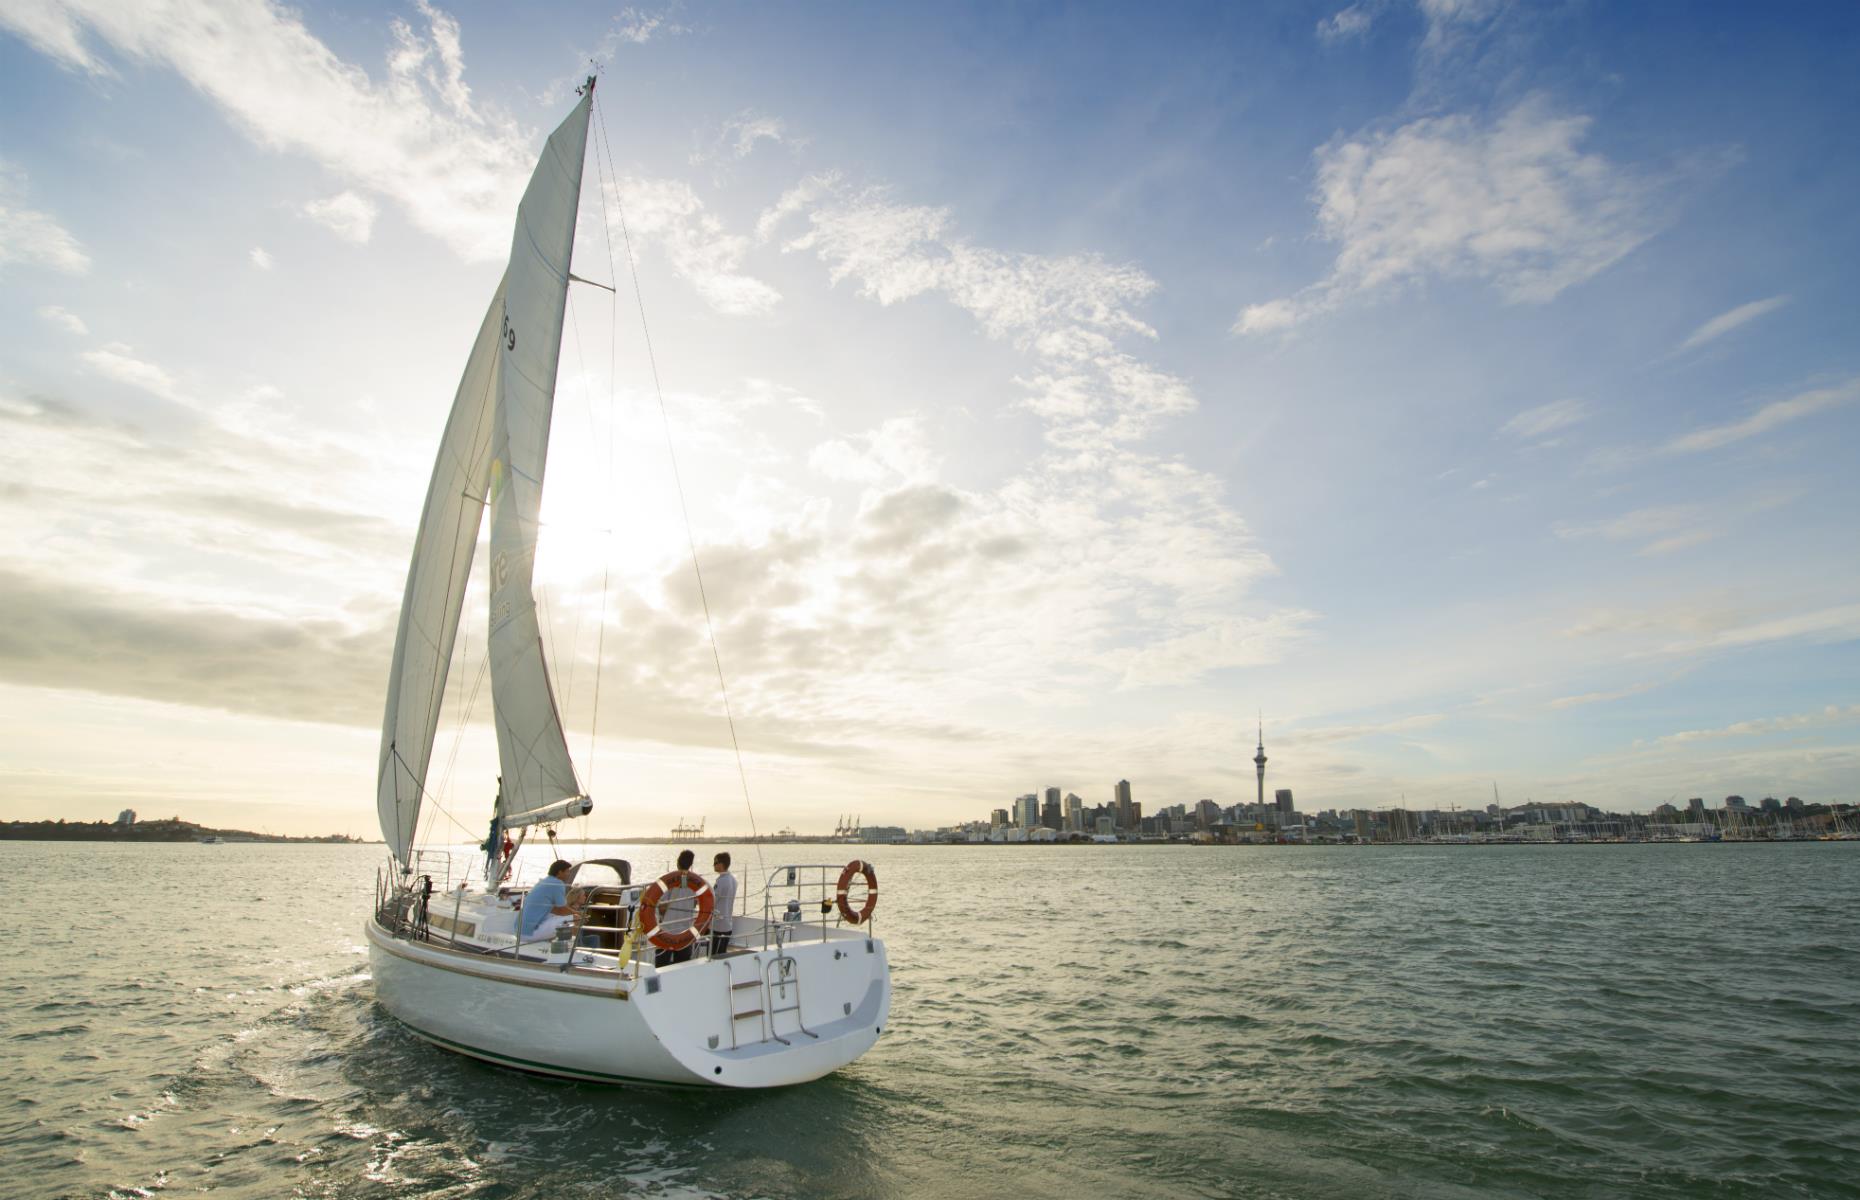 <p>Charter a sailboat or join a cruise to experience Auckland’s Waitematā Harbour from the water. The City of Sails, as it's also known, has a rich maritime heritage and when you’ve learned all you can about Polynesian and European history in its museums, nothing beats seeing Auckland’s skyline with the wind in your hair. There's even an option to book an ex-America's Cup sailing yacht.</p>